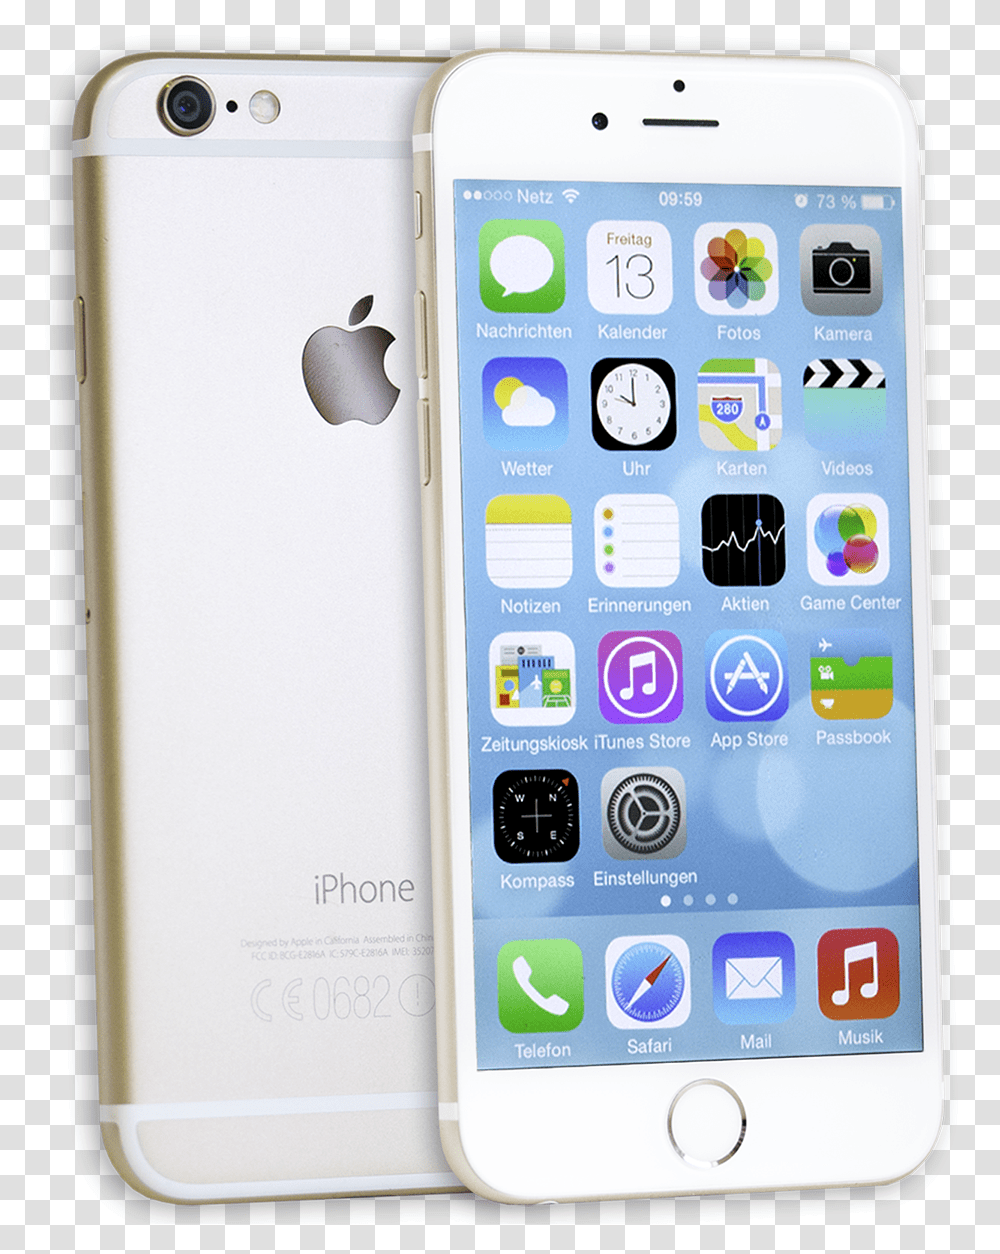 Download Iphone 6 128gb Gold Mg4e2zda Iphone 5s Download Imovie On The Iphone, Mobile Phone, Electronics, Cell Phone, Ipod Transparent Png